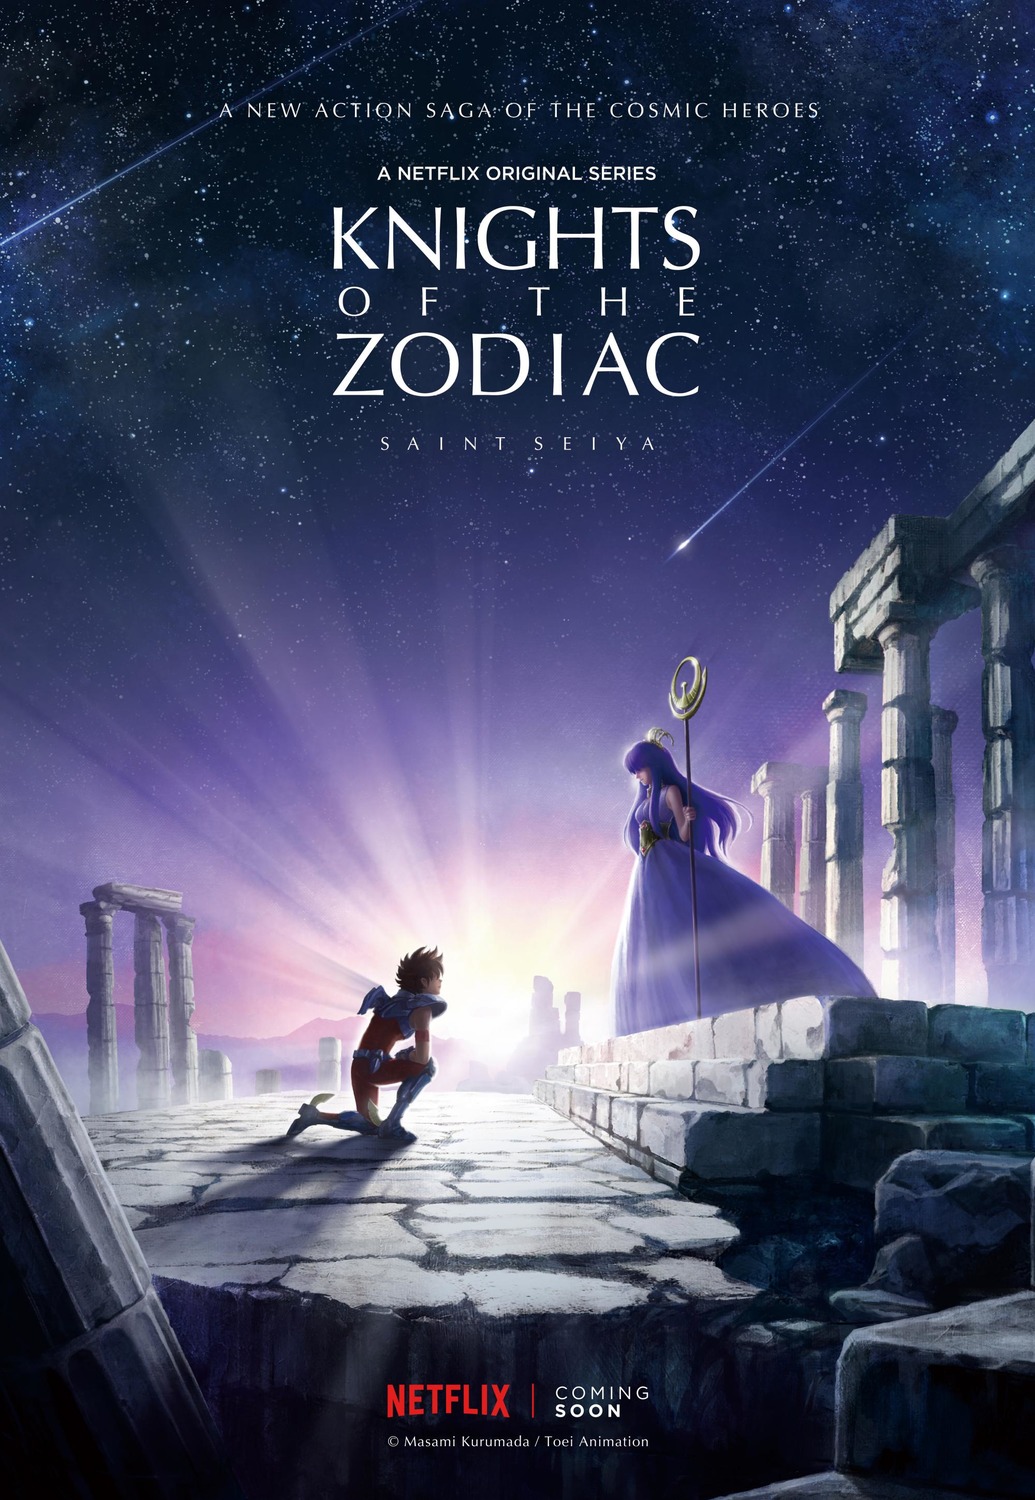 Extra Large TV Poster Image for Saint Seiya: Knights of the Zodiac (#1 of 2)